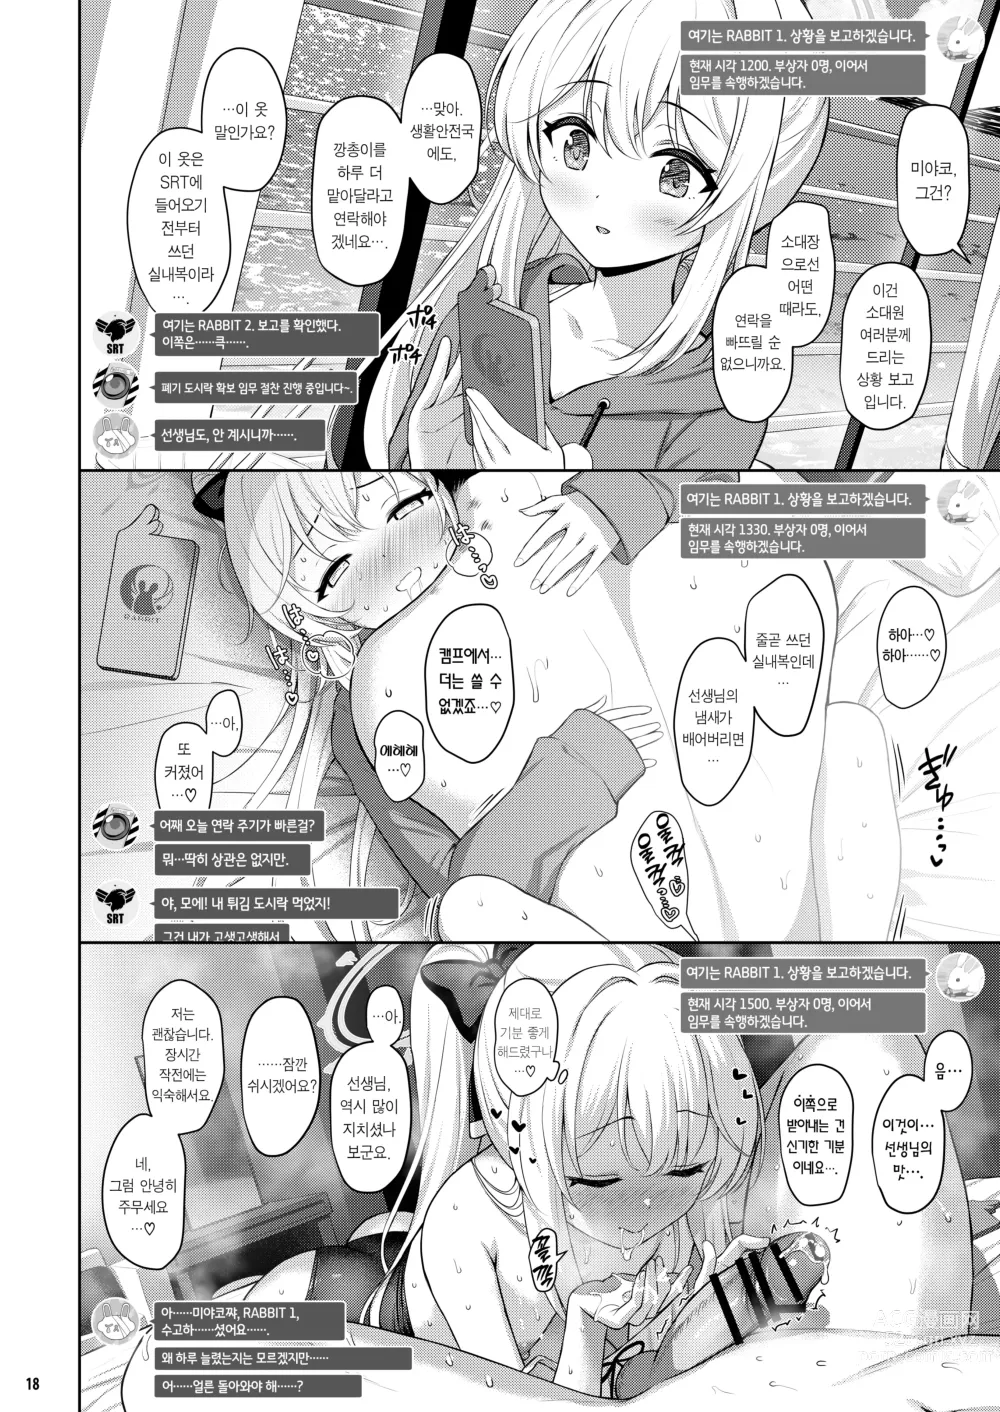 Page 17 of doujinshi 러브 잇 원